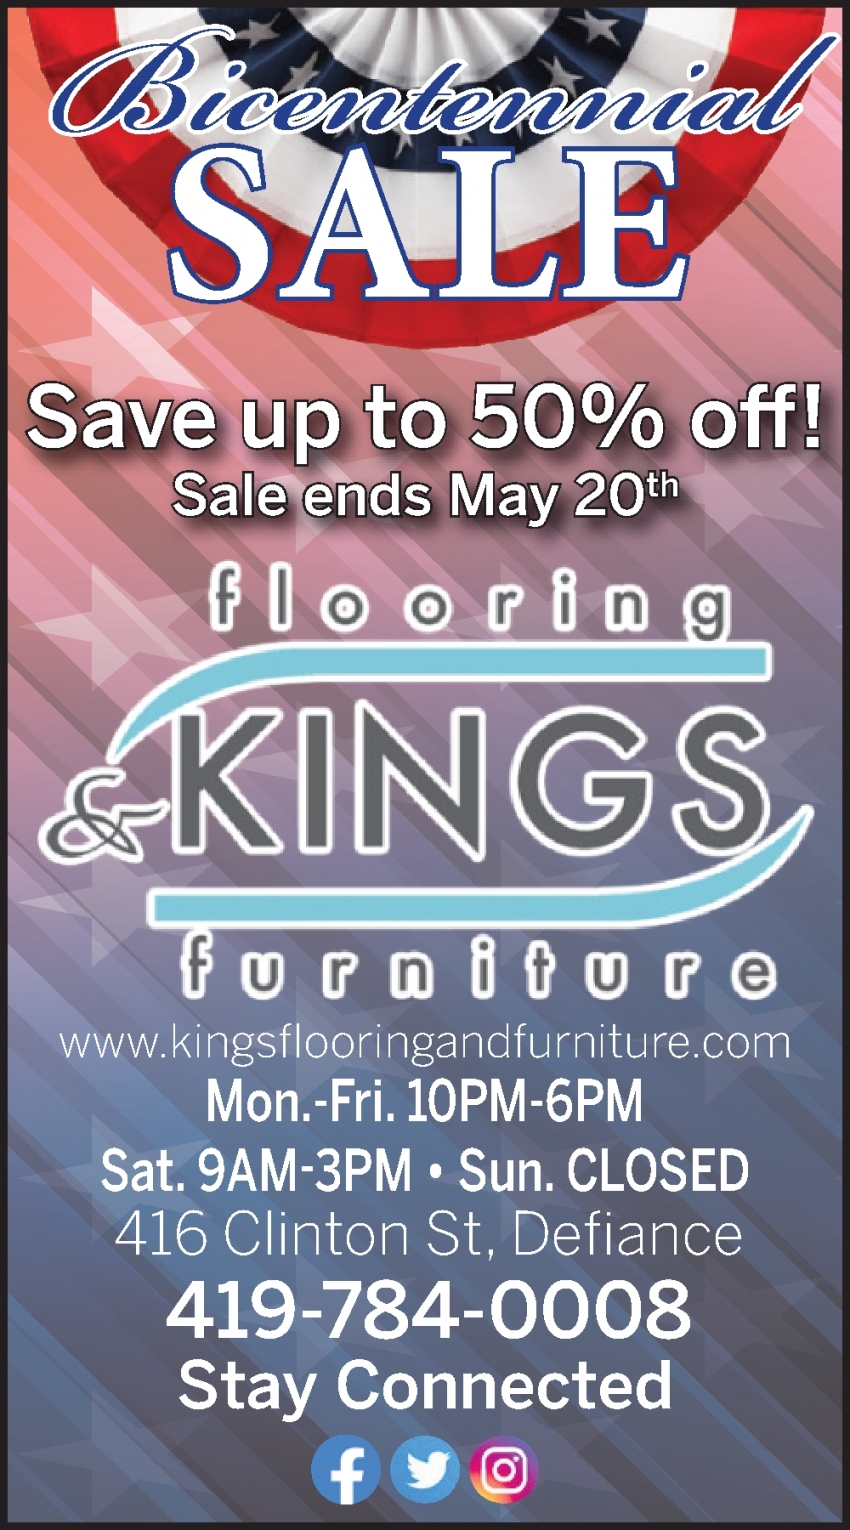 Save Up To 50% OFF!